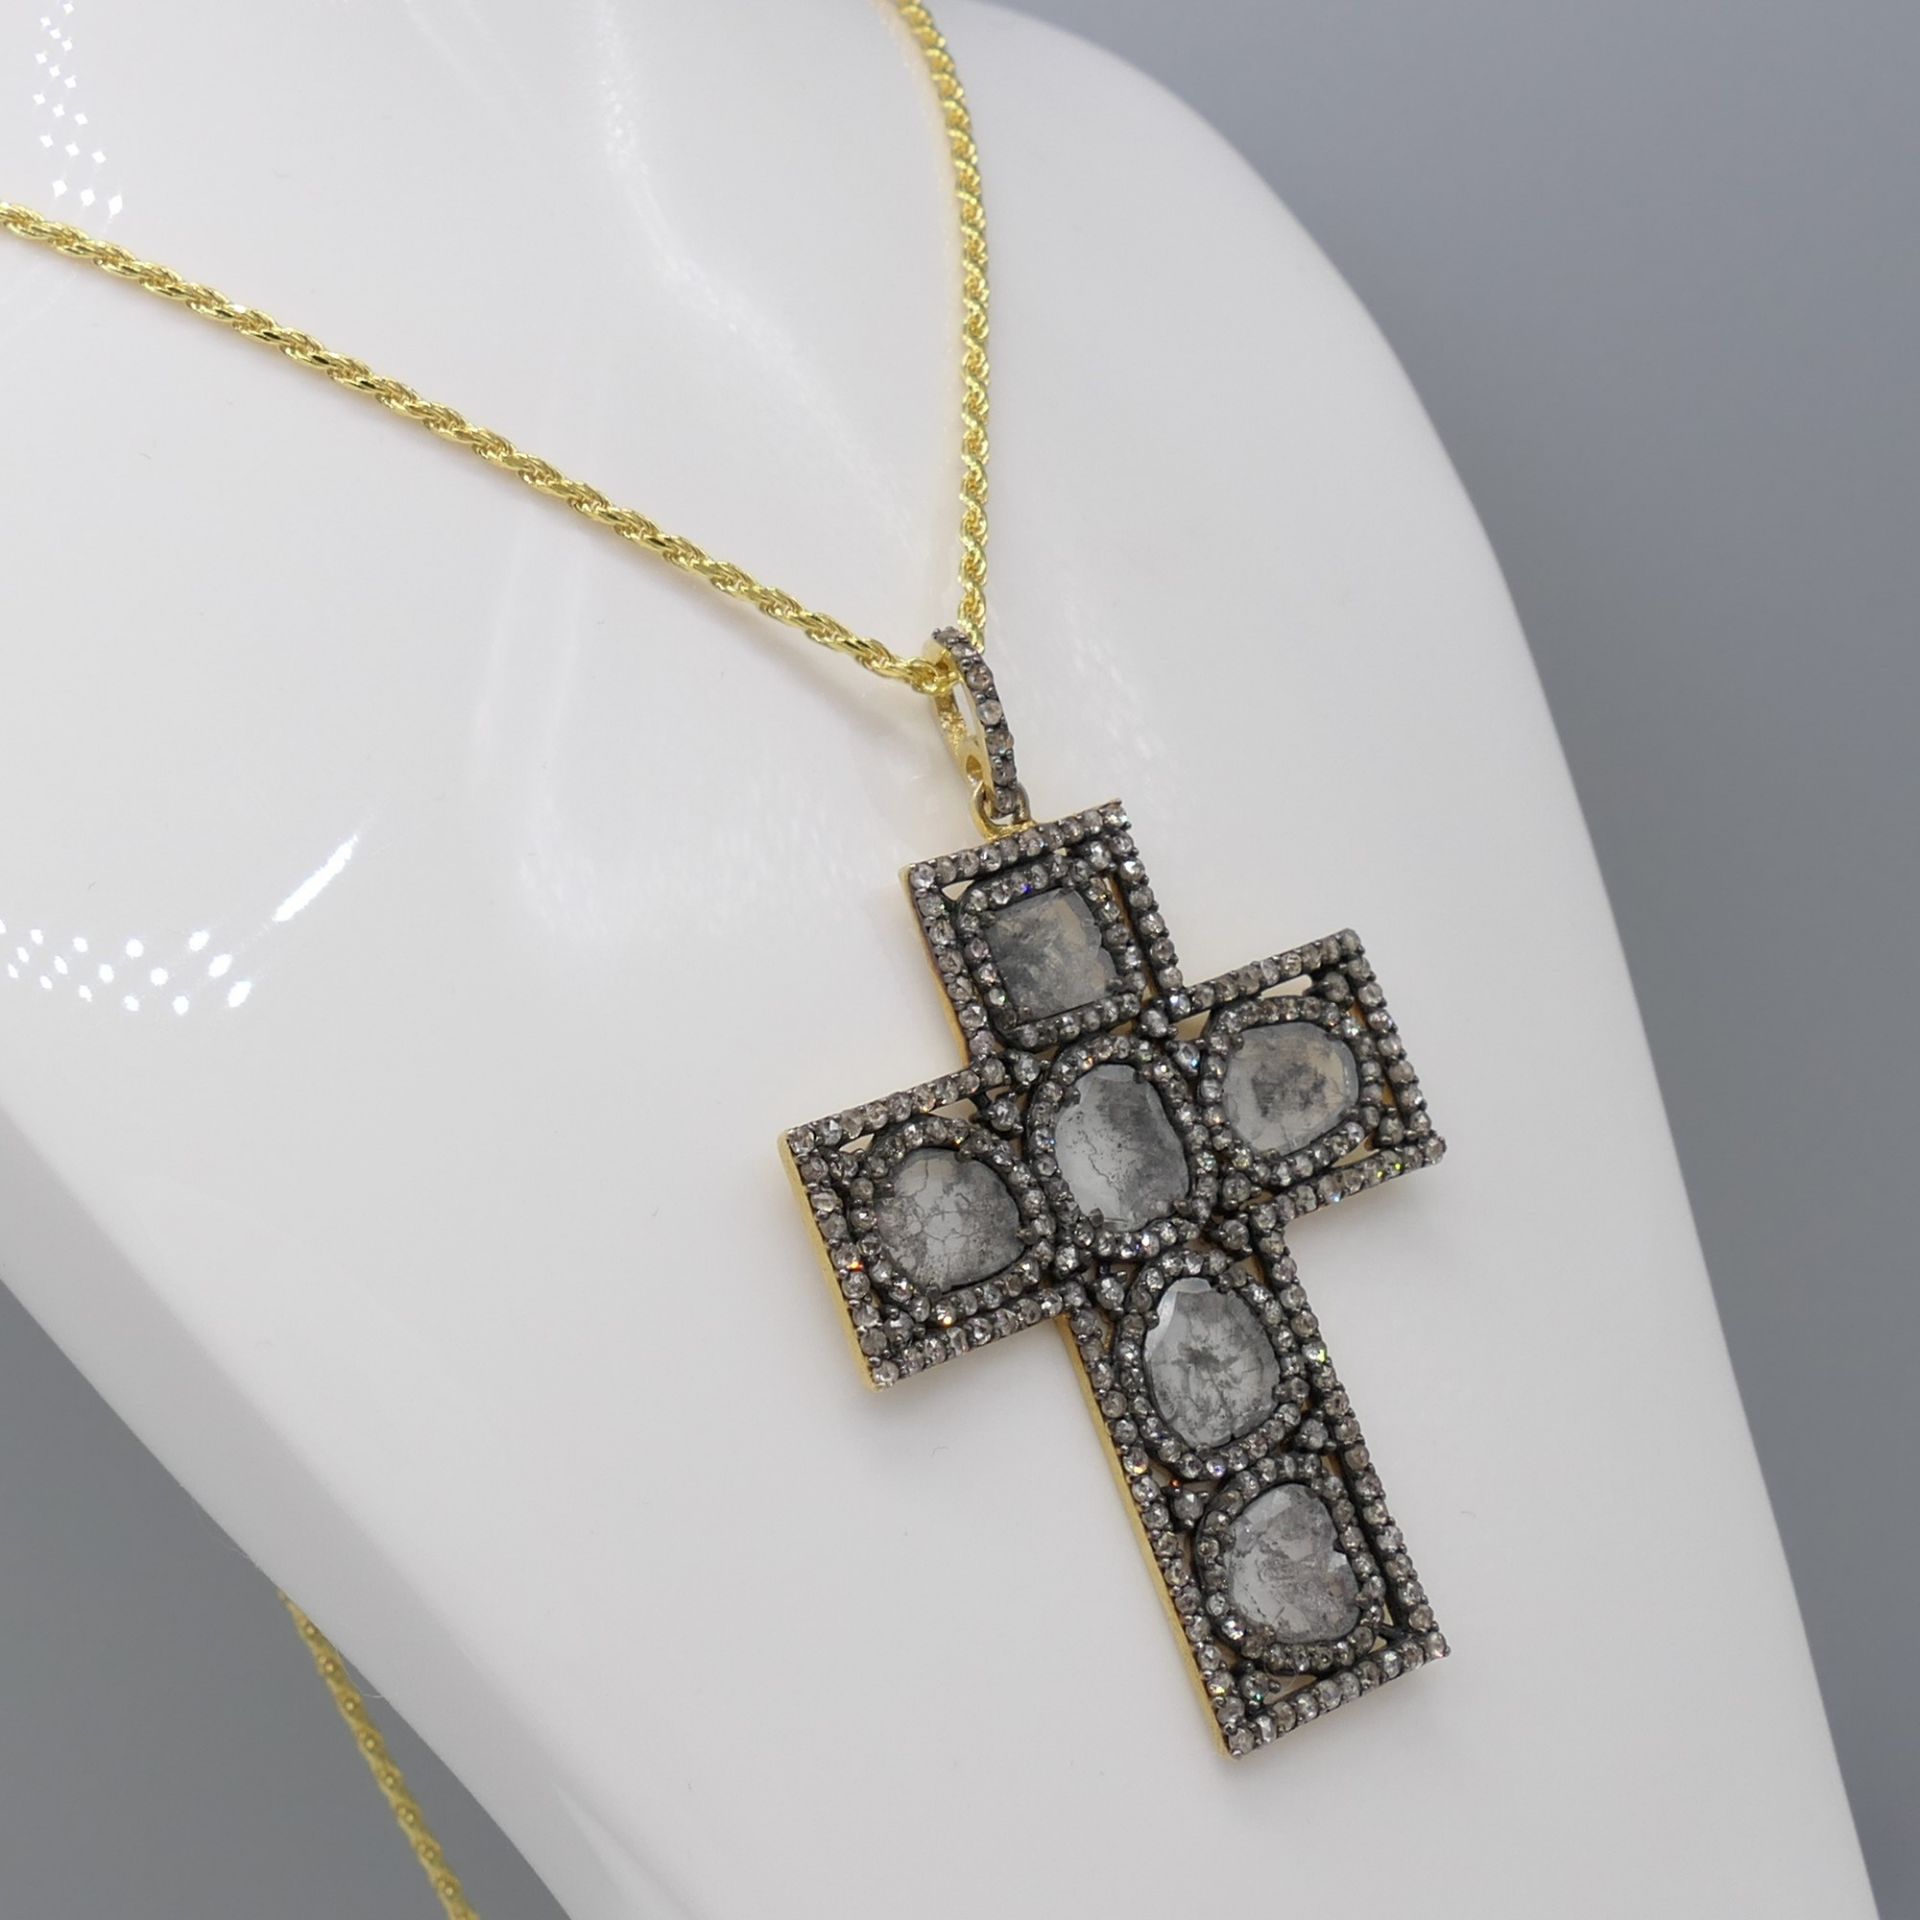 One-Off 3.80 Carat Large Diamond Cross Necklace With Chain - Image 2 of 6